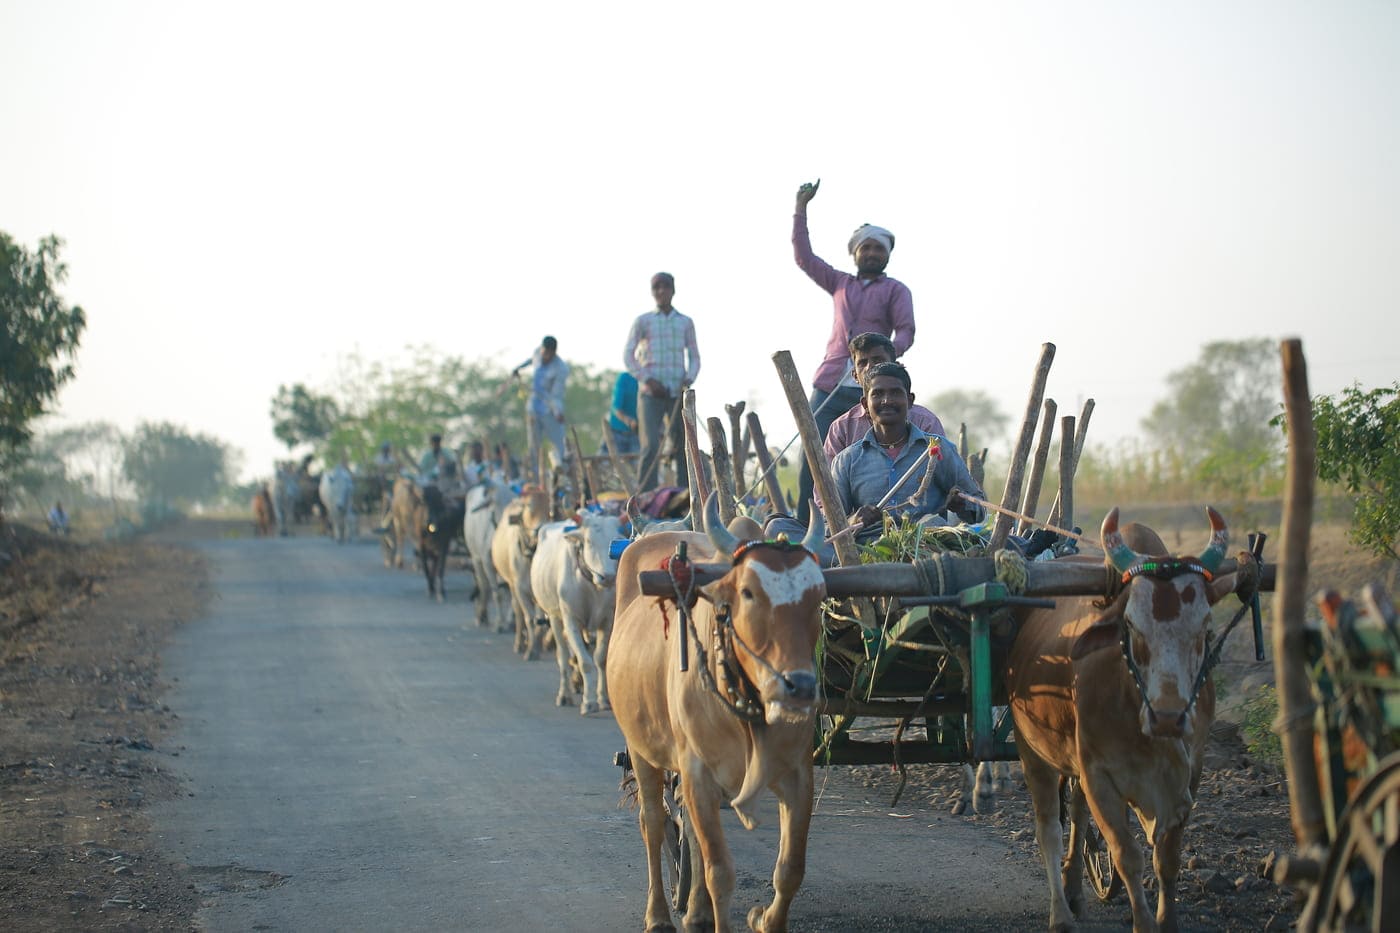 Men driving wooden carts on road drawn by buffaloes, representing the rural landscape in Orchha 